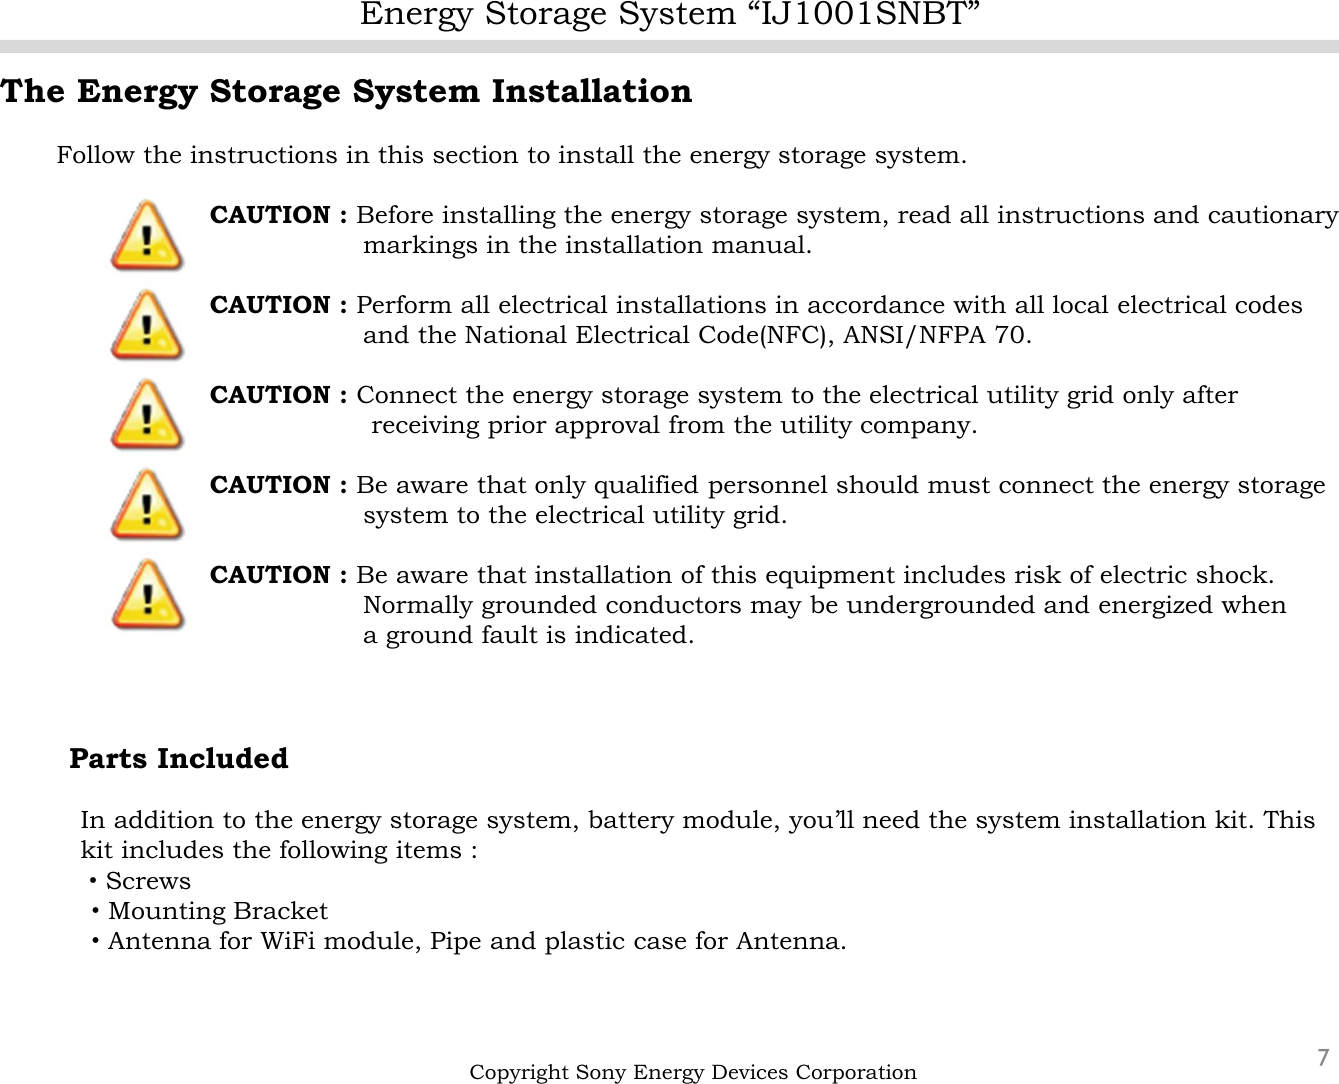 Energy Storage System “IJ1001SNBT”7The Energy Storage System InstallationFollow the instructions in this section to install the energy storage system.CAUTION : Before installing the energy storage system, read all instructions and cautionarymarkings in the installation manual.CAUTION : Perform all electrical installations in accordance with all local electrical codes and the National Electrical Code(NFC), ANSI/NFPA 70.CAUTION : Connect the energy storage system to the electrical utility grid only after  receiving prior approval from the utility company.CAUTION : Be aware that only qualified personnel should must connect the energy storage system to the electrical utility grid.CAUTION : Be aware that installation of this equipment includes risk of electric shock.Normally grounded conductors may be undergrounded and energized whena ground fault is indicated.Parts IncludedIn addition to the energy storage system, battery module, you’ll need the system installation kit. This kit includes the following items :・Screws・Mounting Bracket・Antenna for WiFi module, Pipe and plastic case for Antenna.   Copyright Sony Energy Devices Corporation